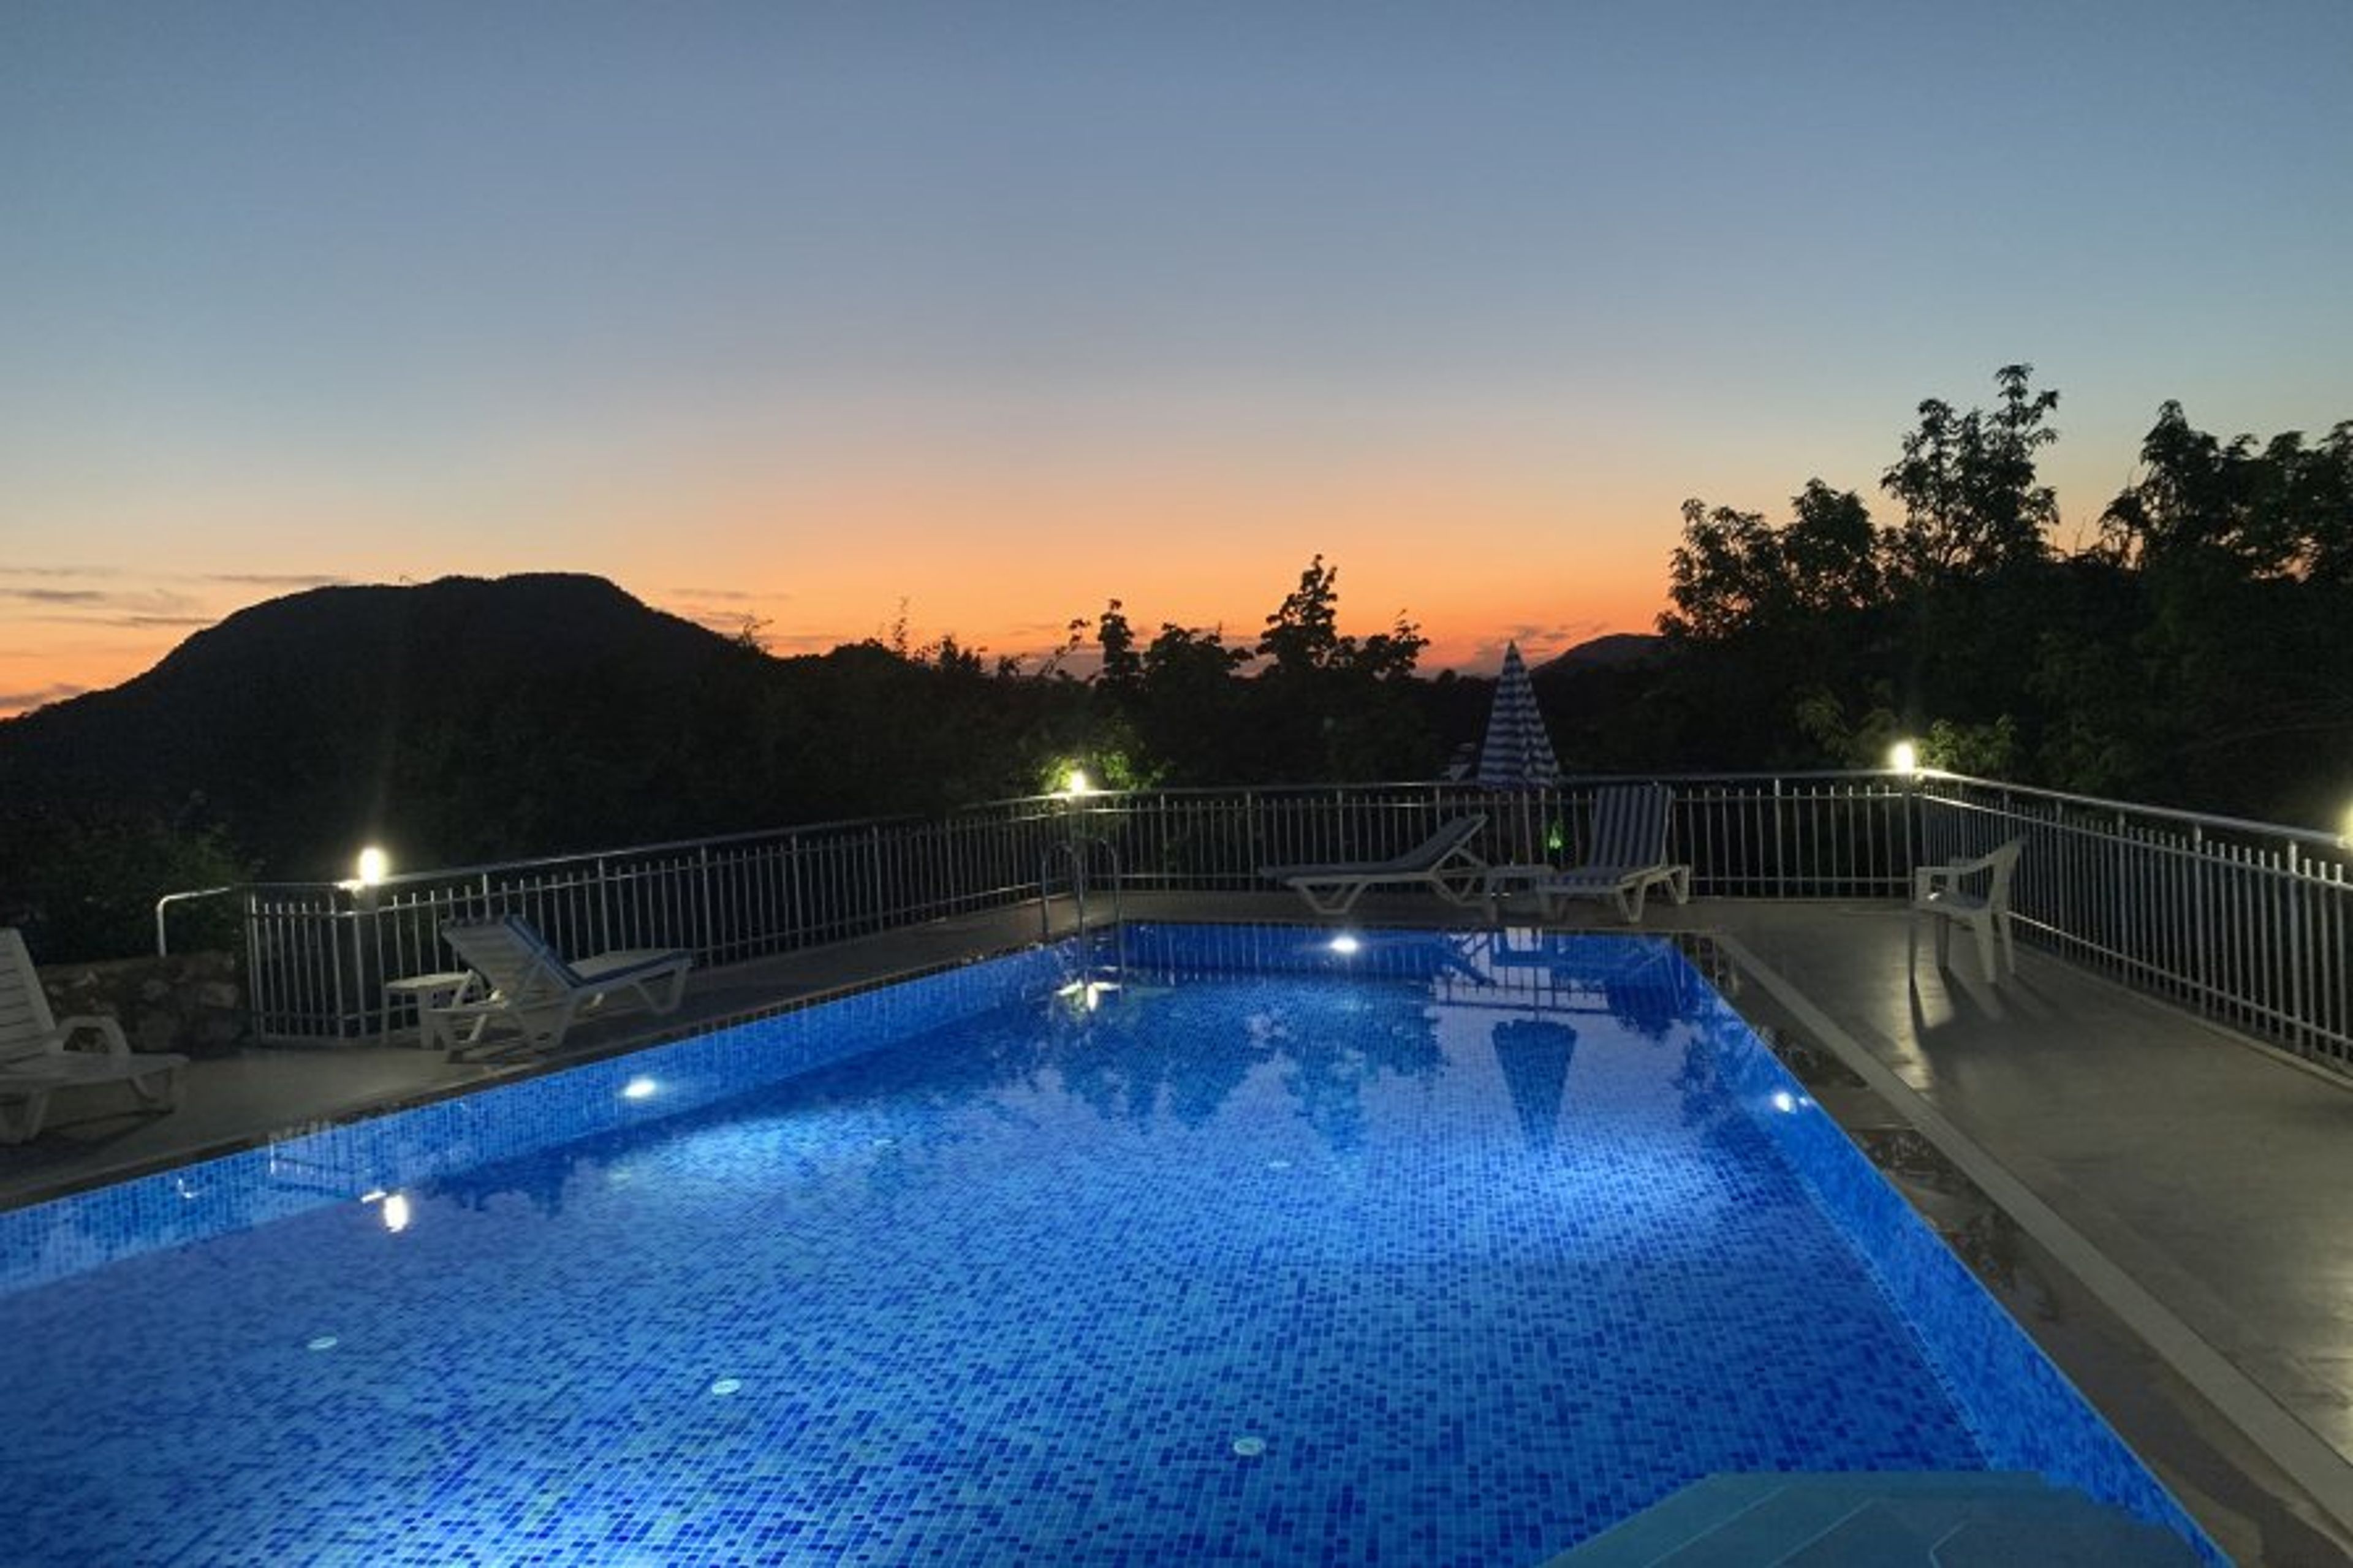 Pool in the evening